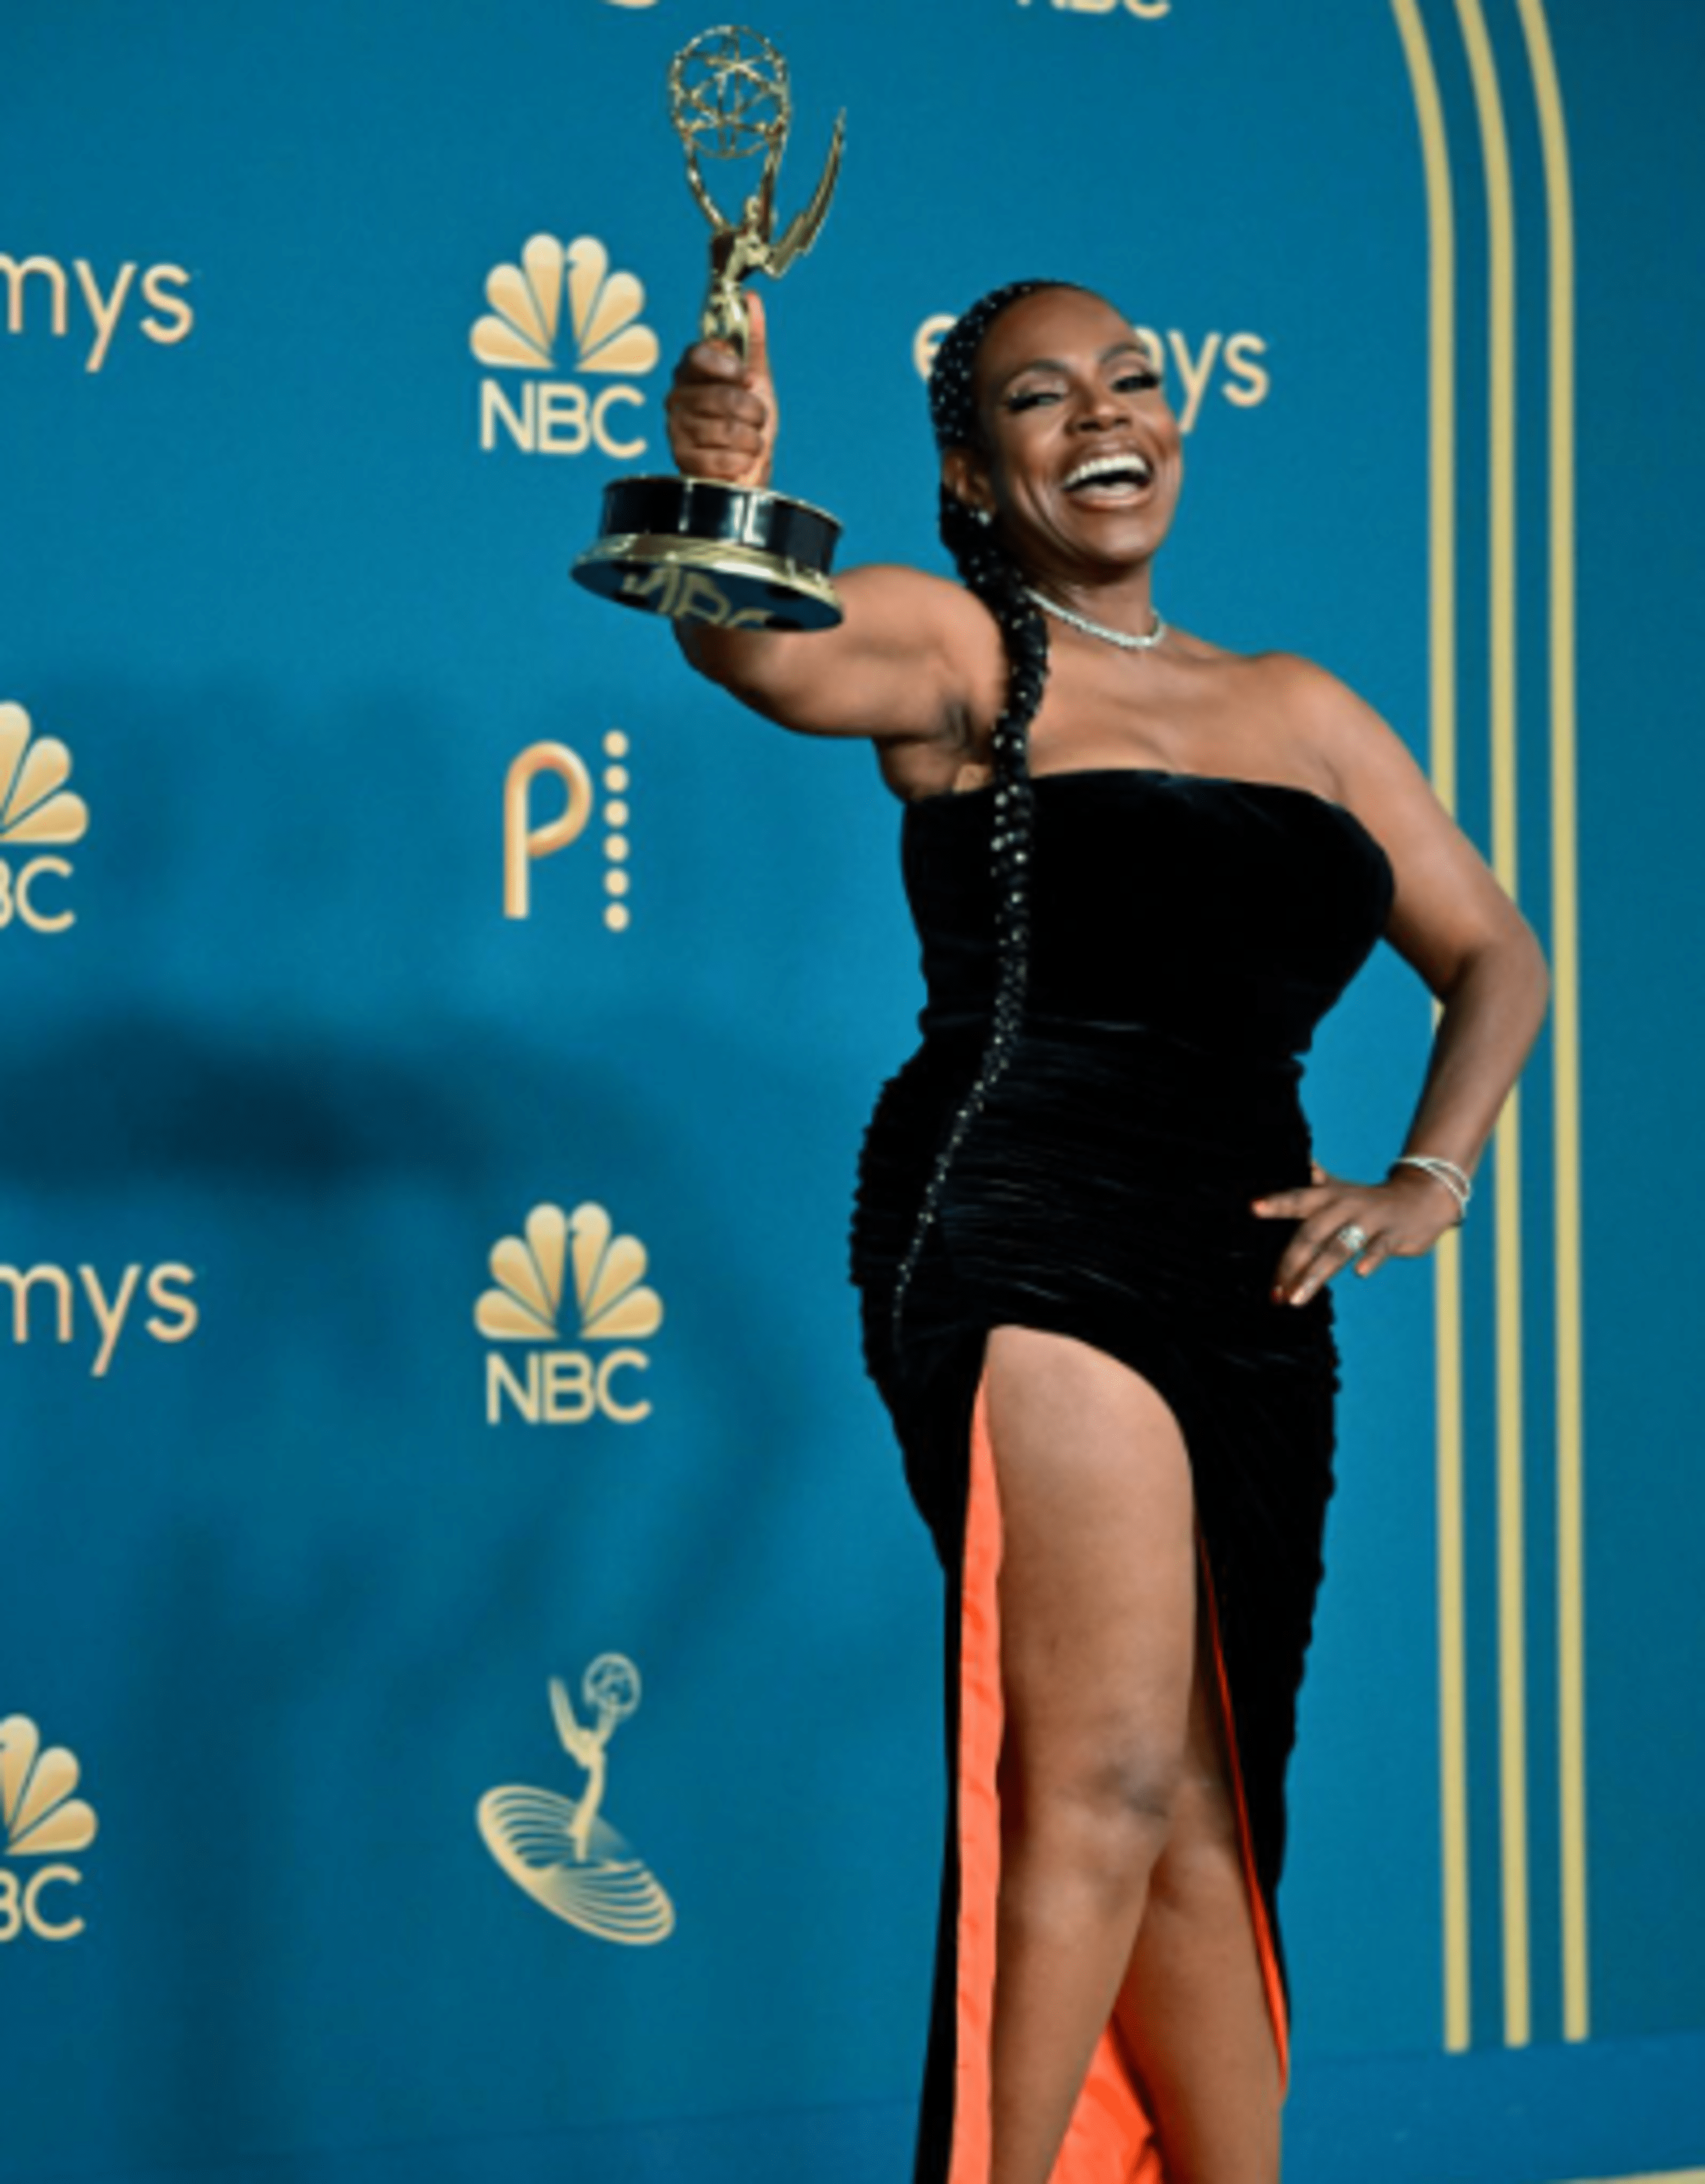 Ahead of the 2022 Emmy Awards, Sheryl Lee Ralph experienced a catastrophic wardrobe malfunction